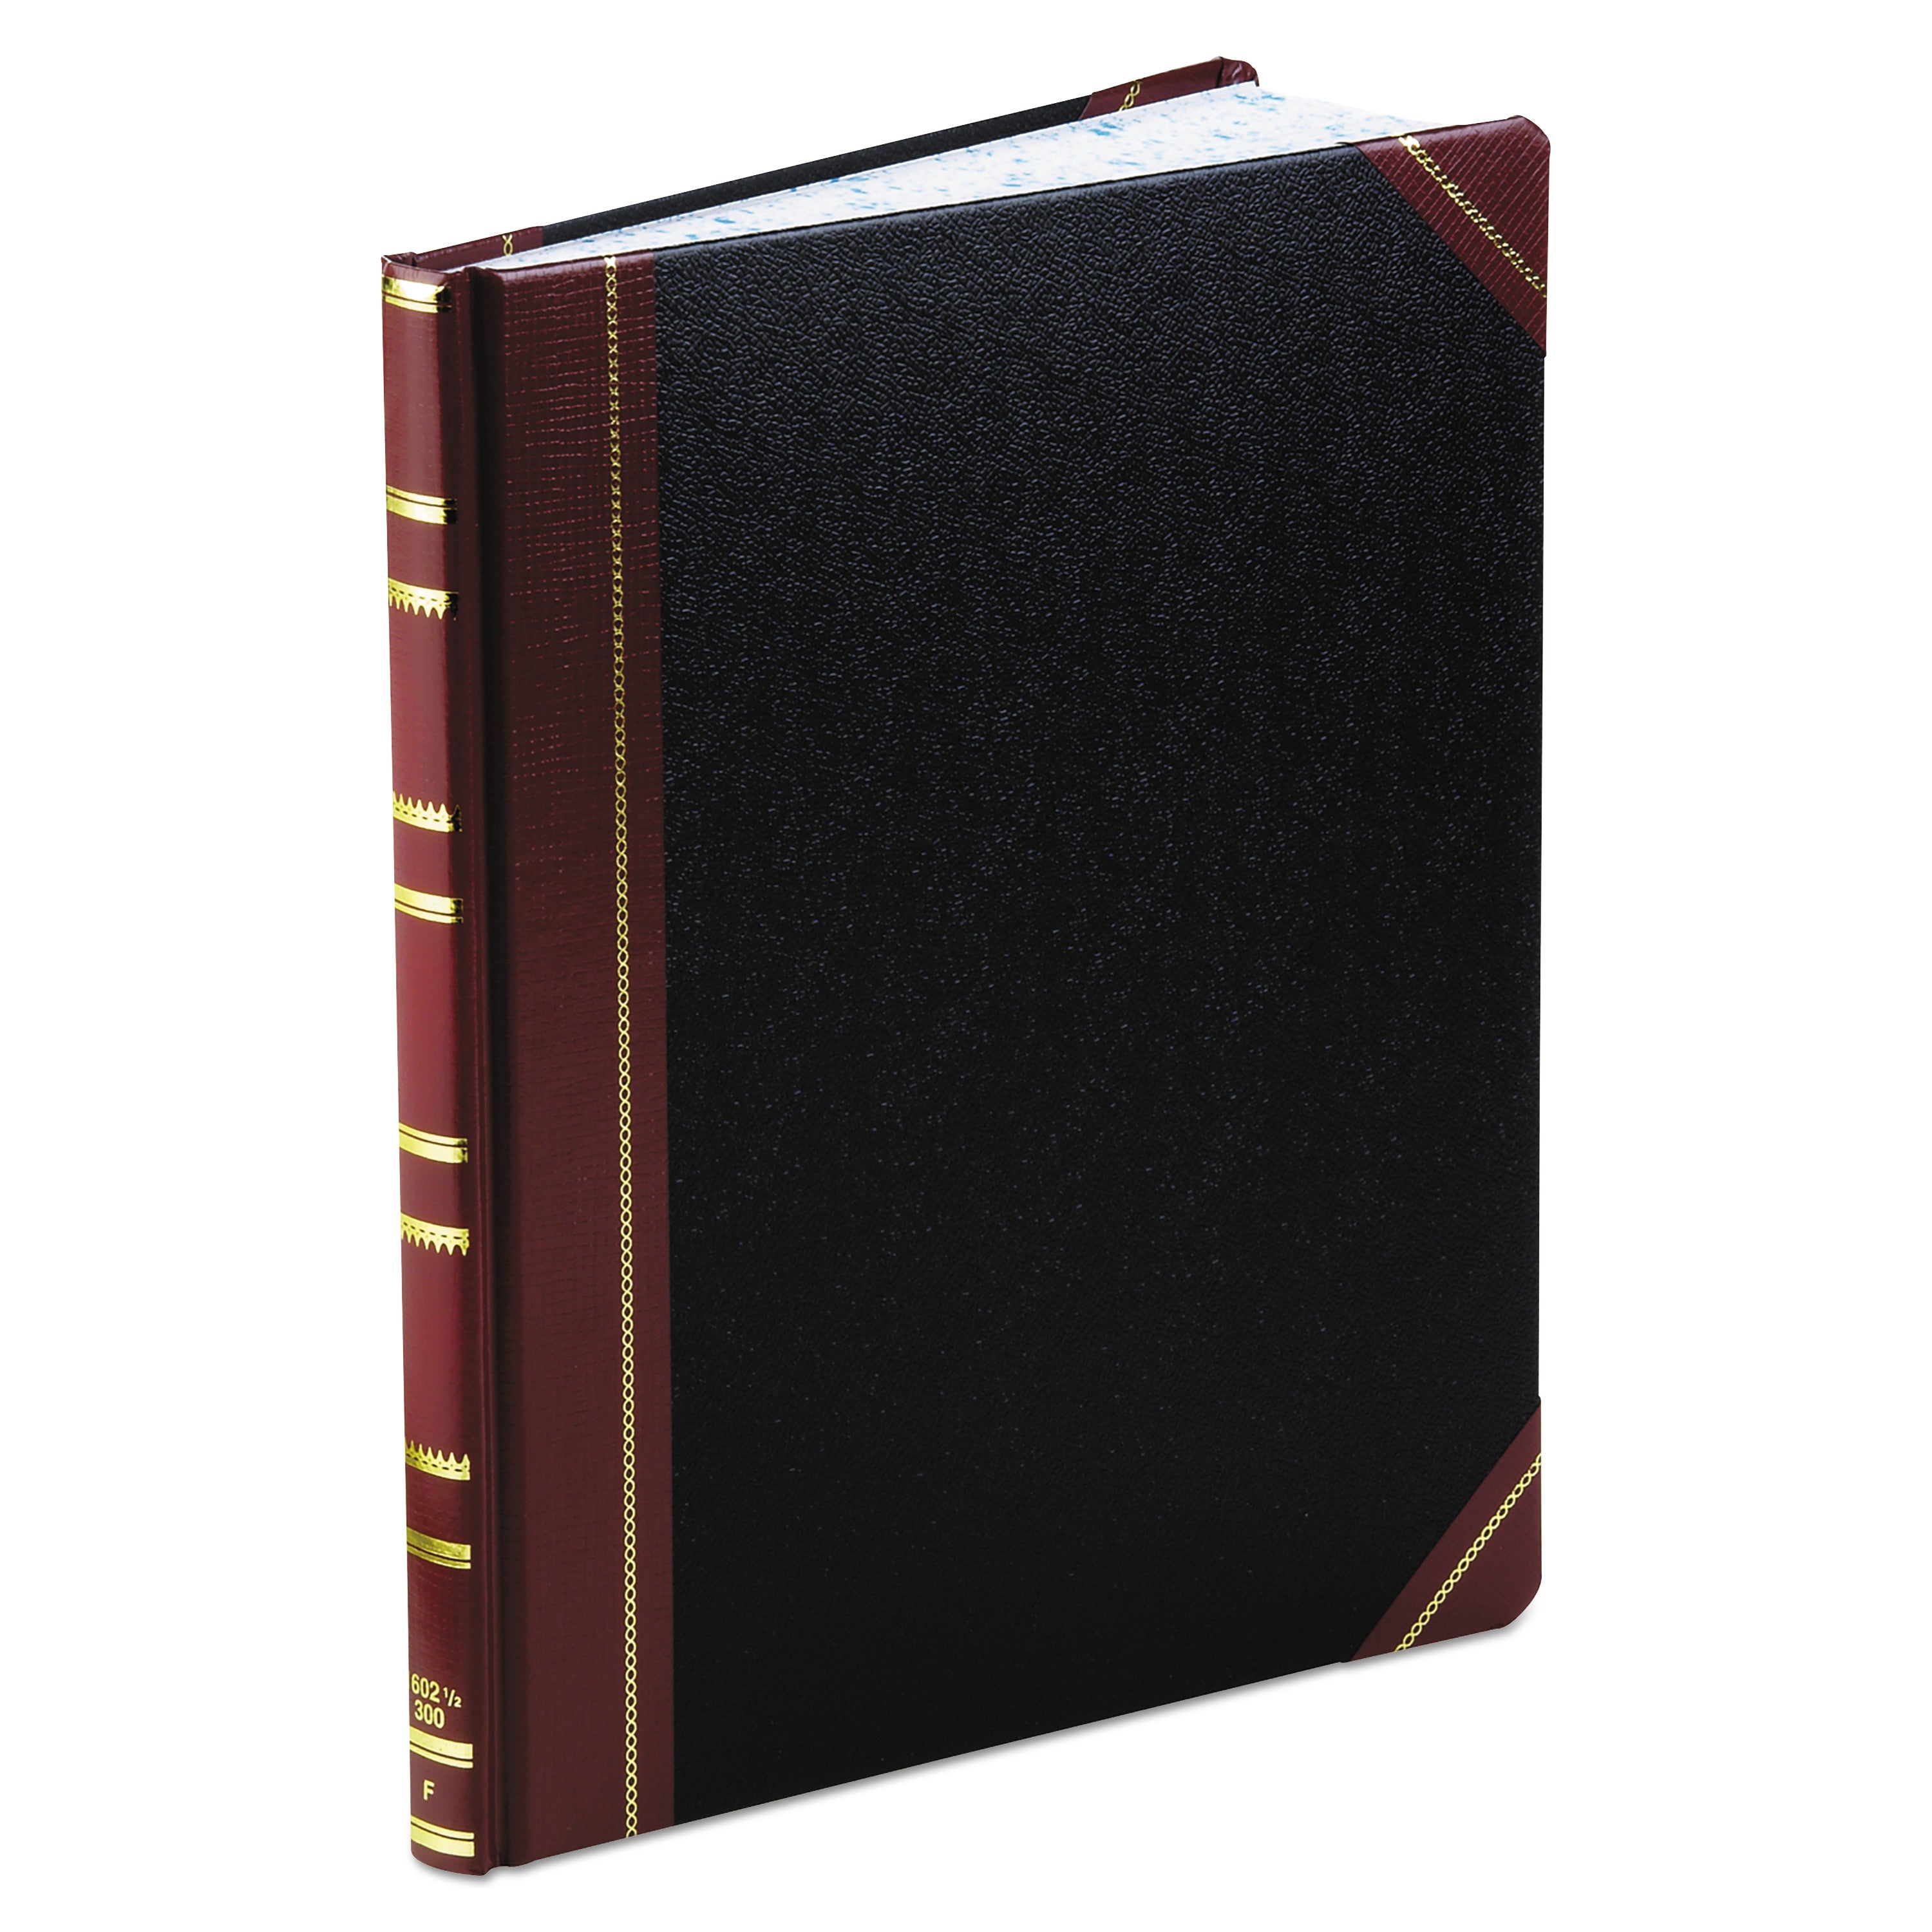 extra-durable-bound-book-single-page-record-rule-format-black-maroon-gold-cover-1194-x-978-sheets-300-sheets-book_bor1602123f - 1